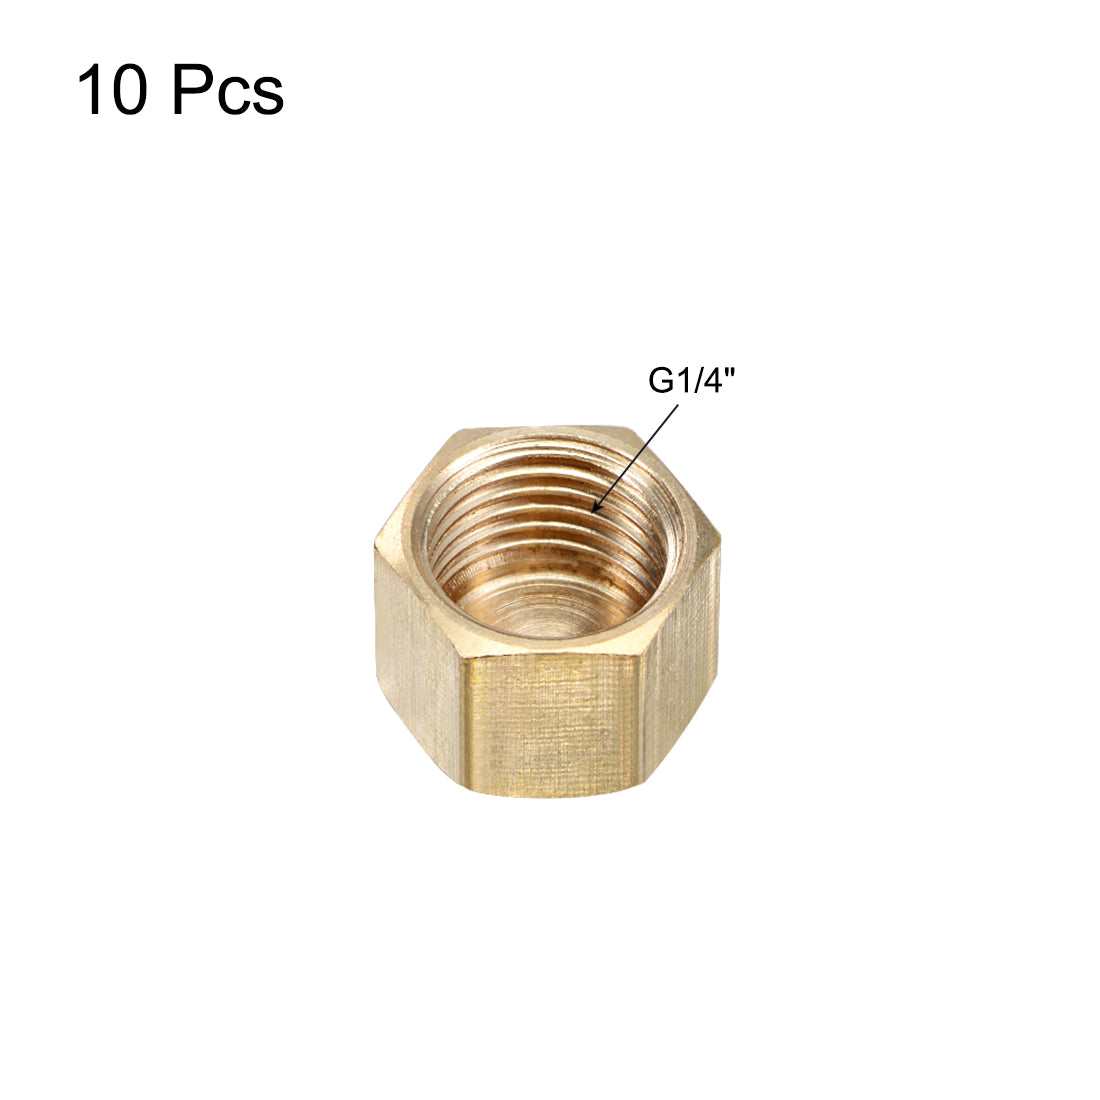 uxcell Uxcell 1/4-Inch Brass Cap 10pcs G1/4 Female Pipe Fitting Hex Compression Stop Valve Connector